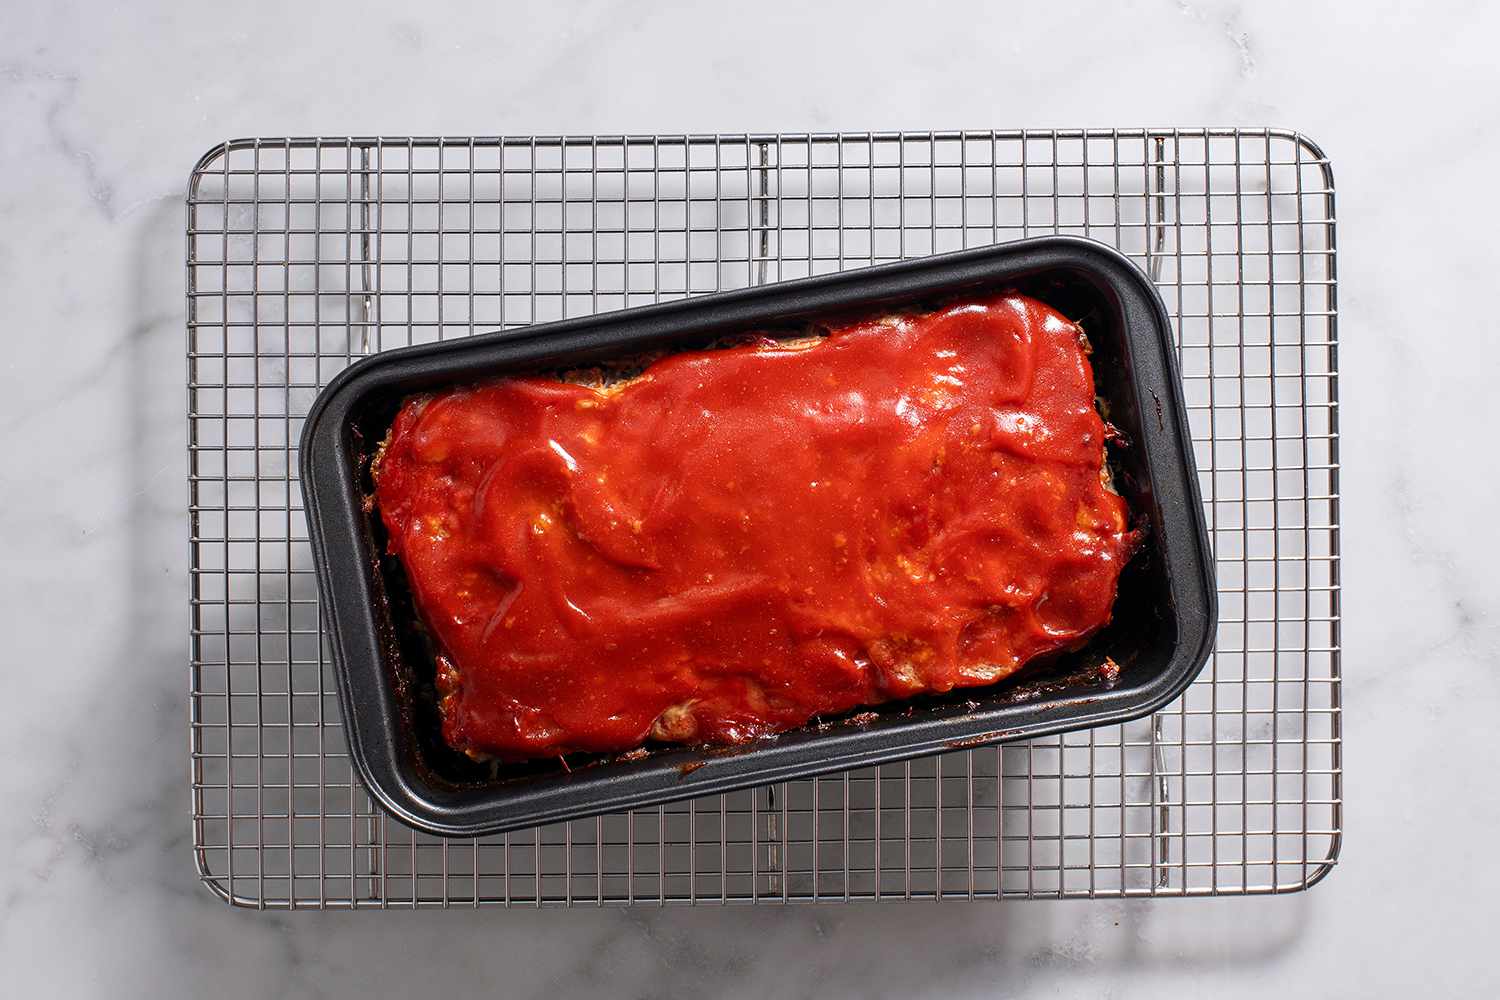 Baked meatloaf in a loaf pan on a metal wire cooling rack